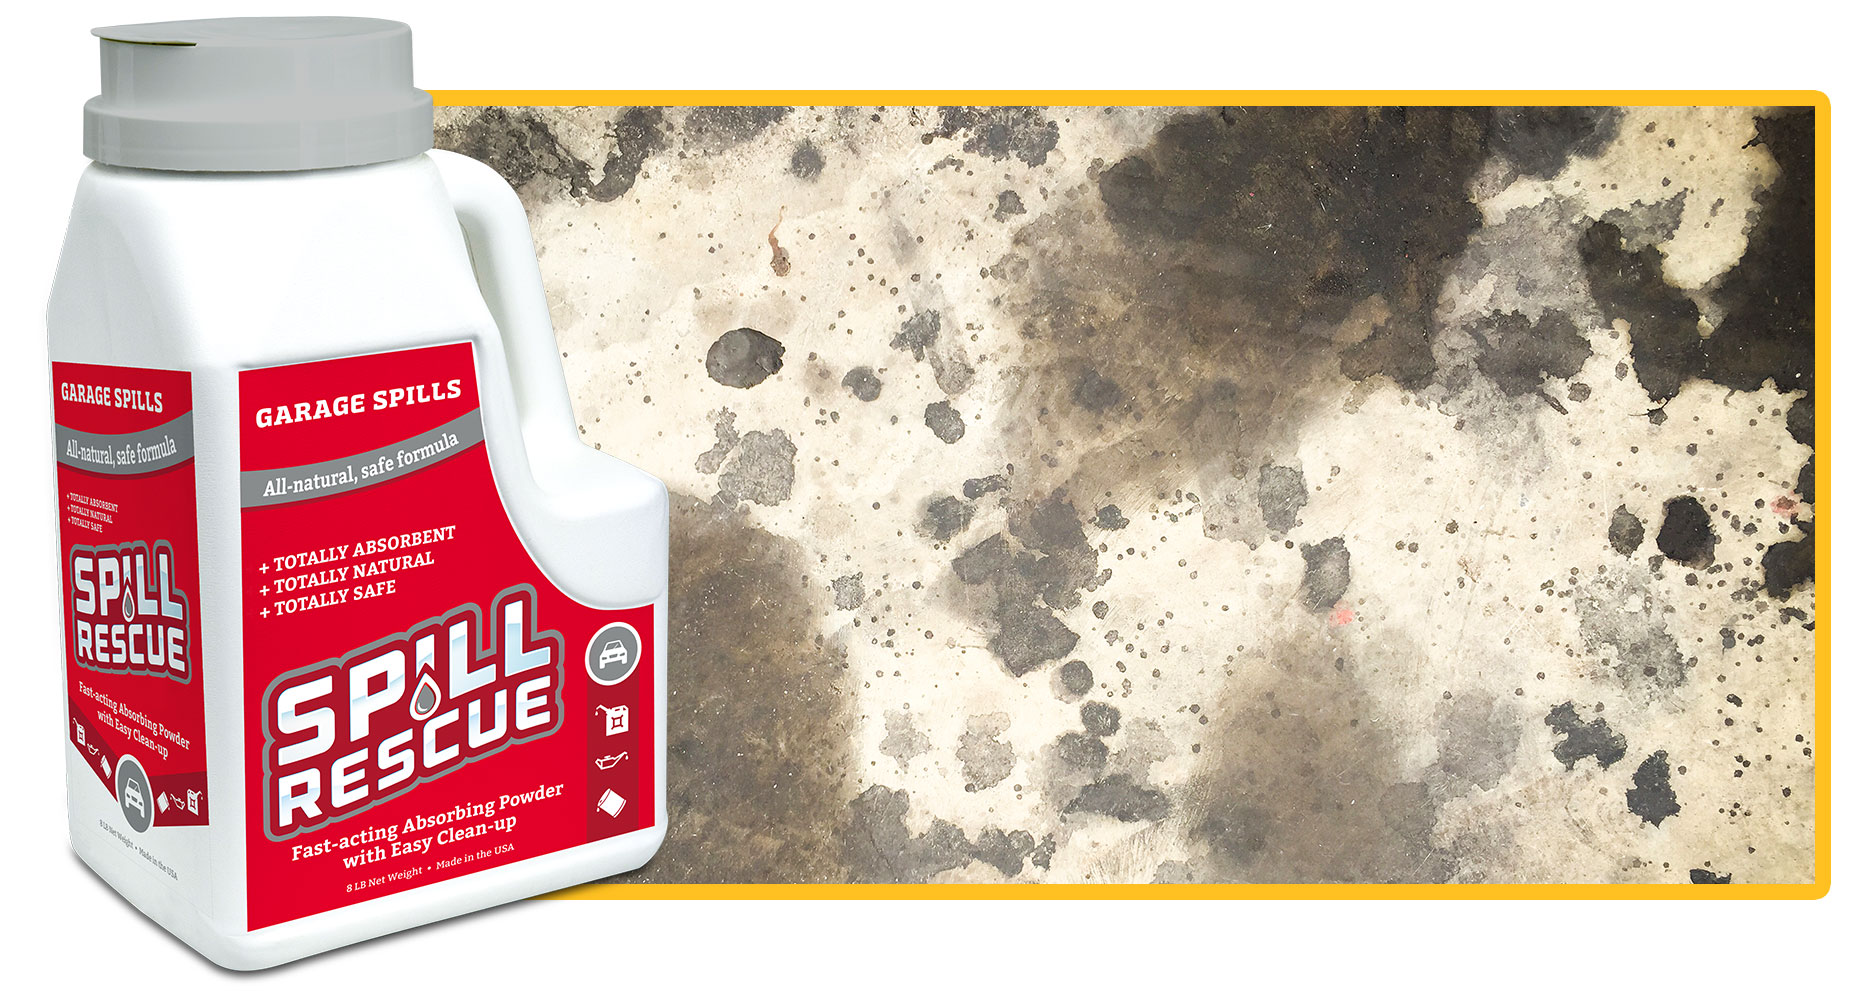 PureSky Products Spill Rescue for Garage Spills